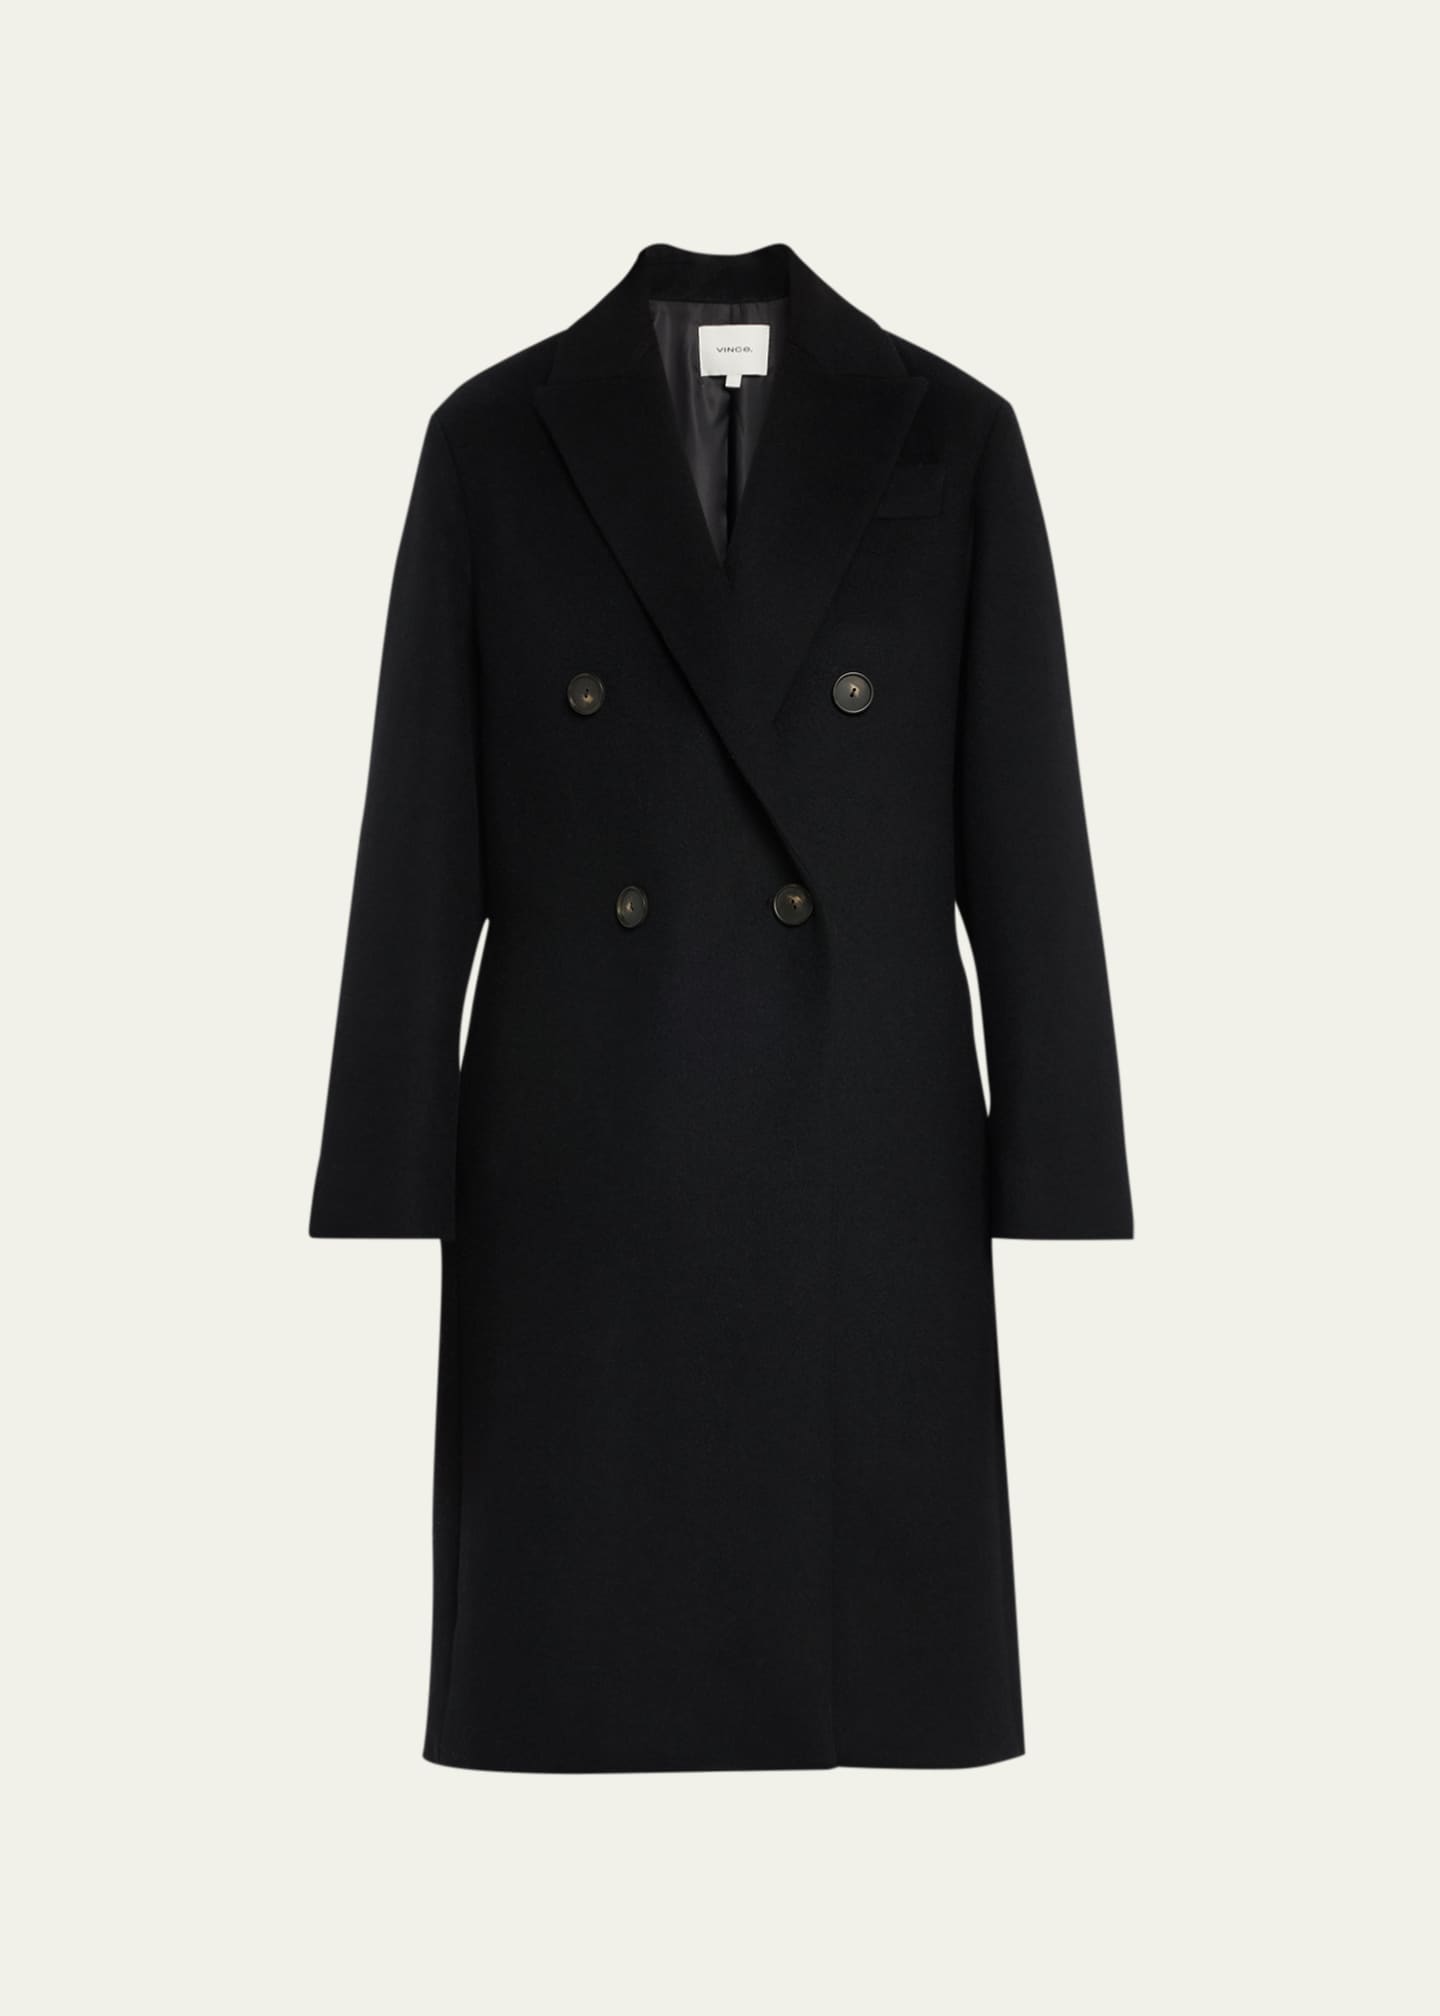 Vince Double-Breasted Wool Peacoat - Bergdorf Goodman